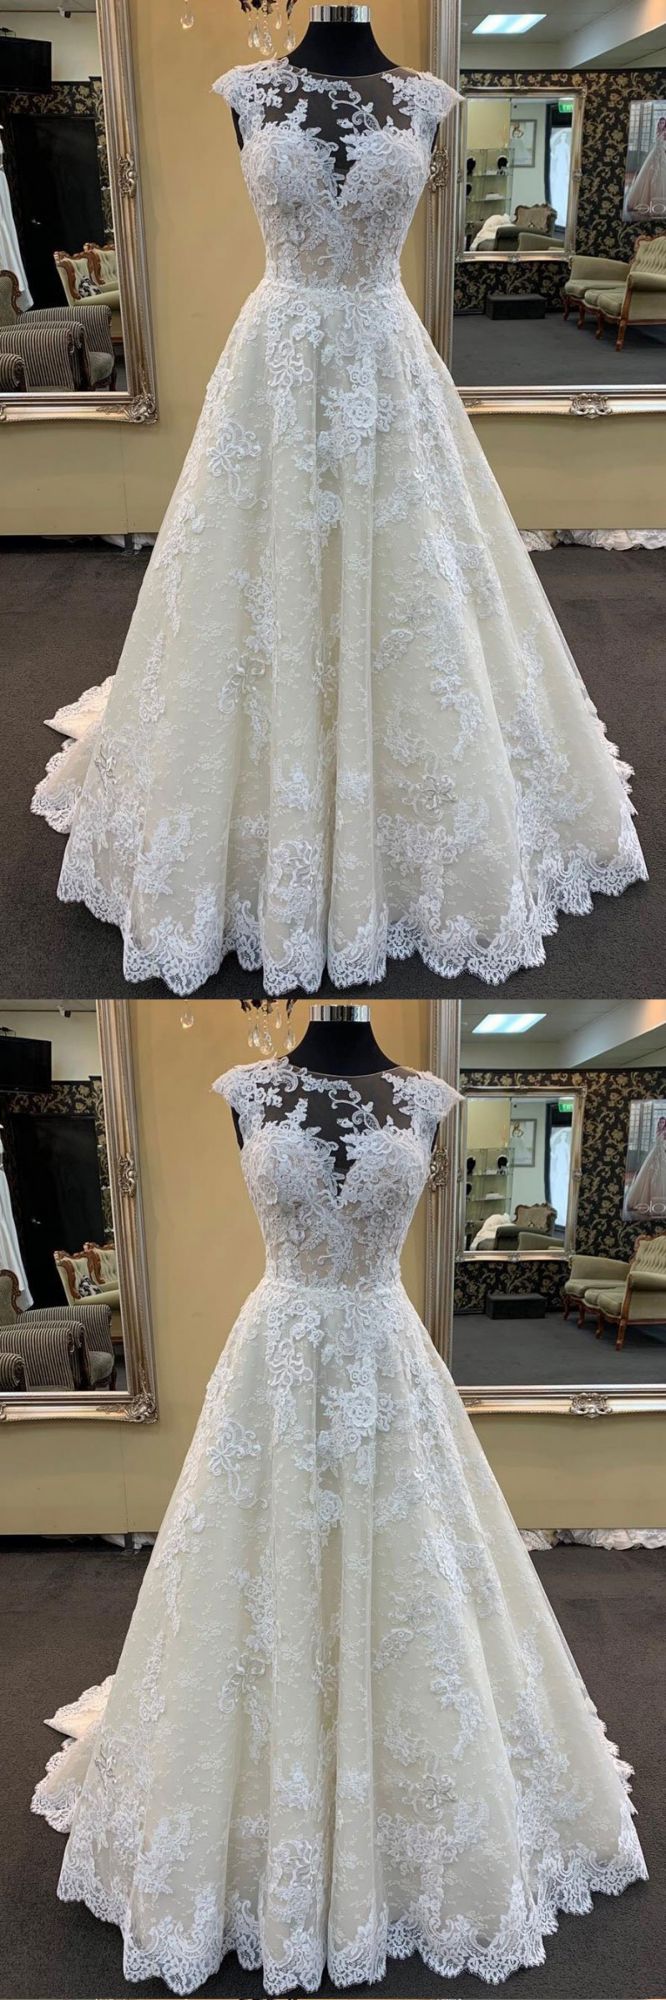 Chic Ivory Lace Round Neck Long Wedding Dress Cap Sleeve Sweep Train Bridal Gowns On Sale-27dress